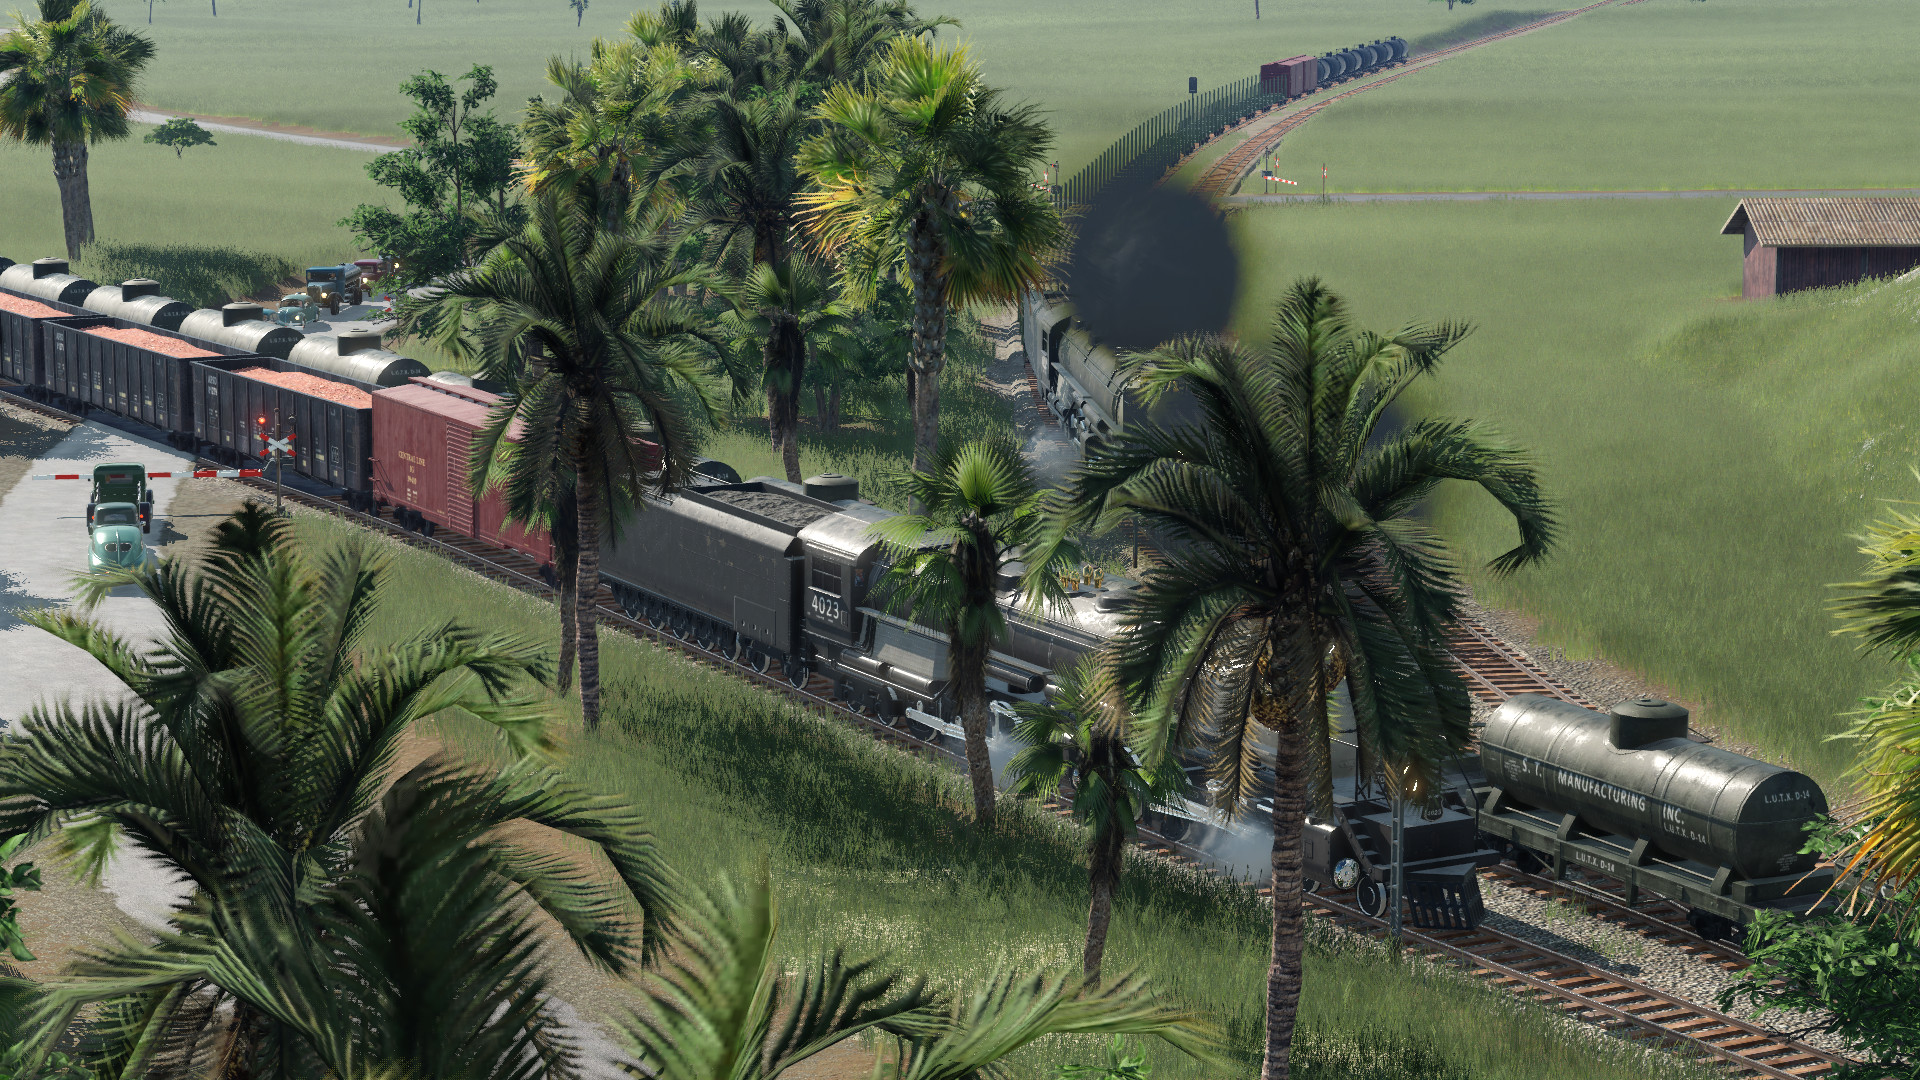 Palm trees and steam locomotives